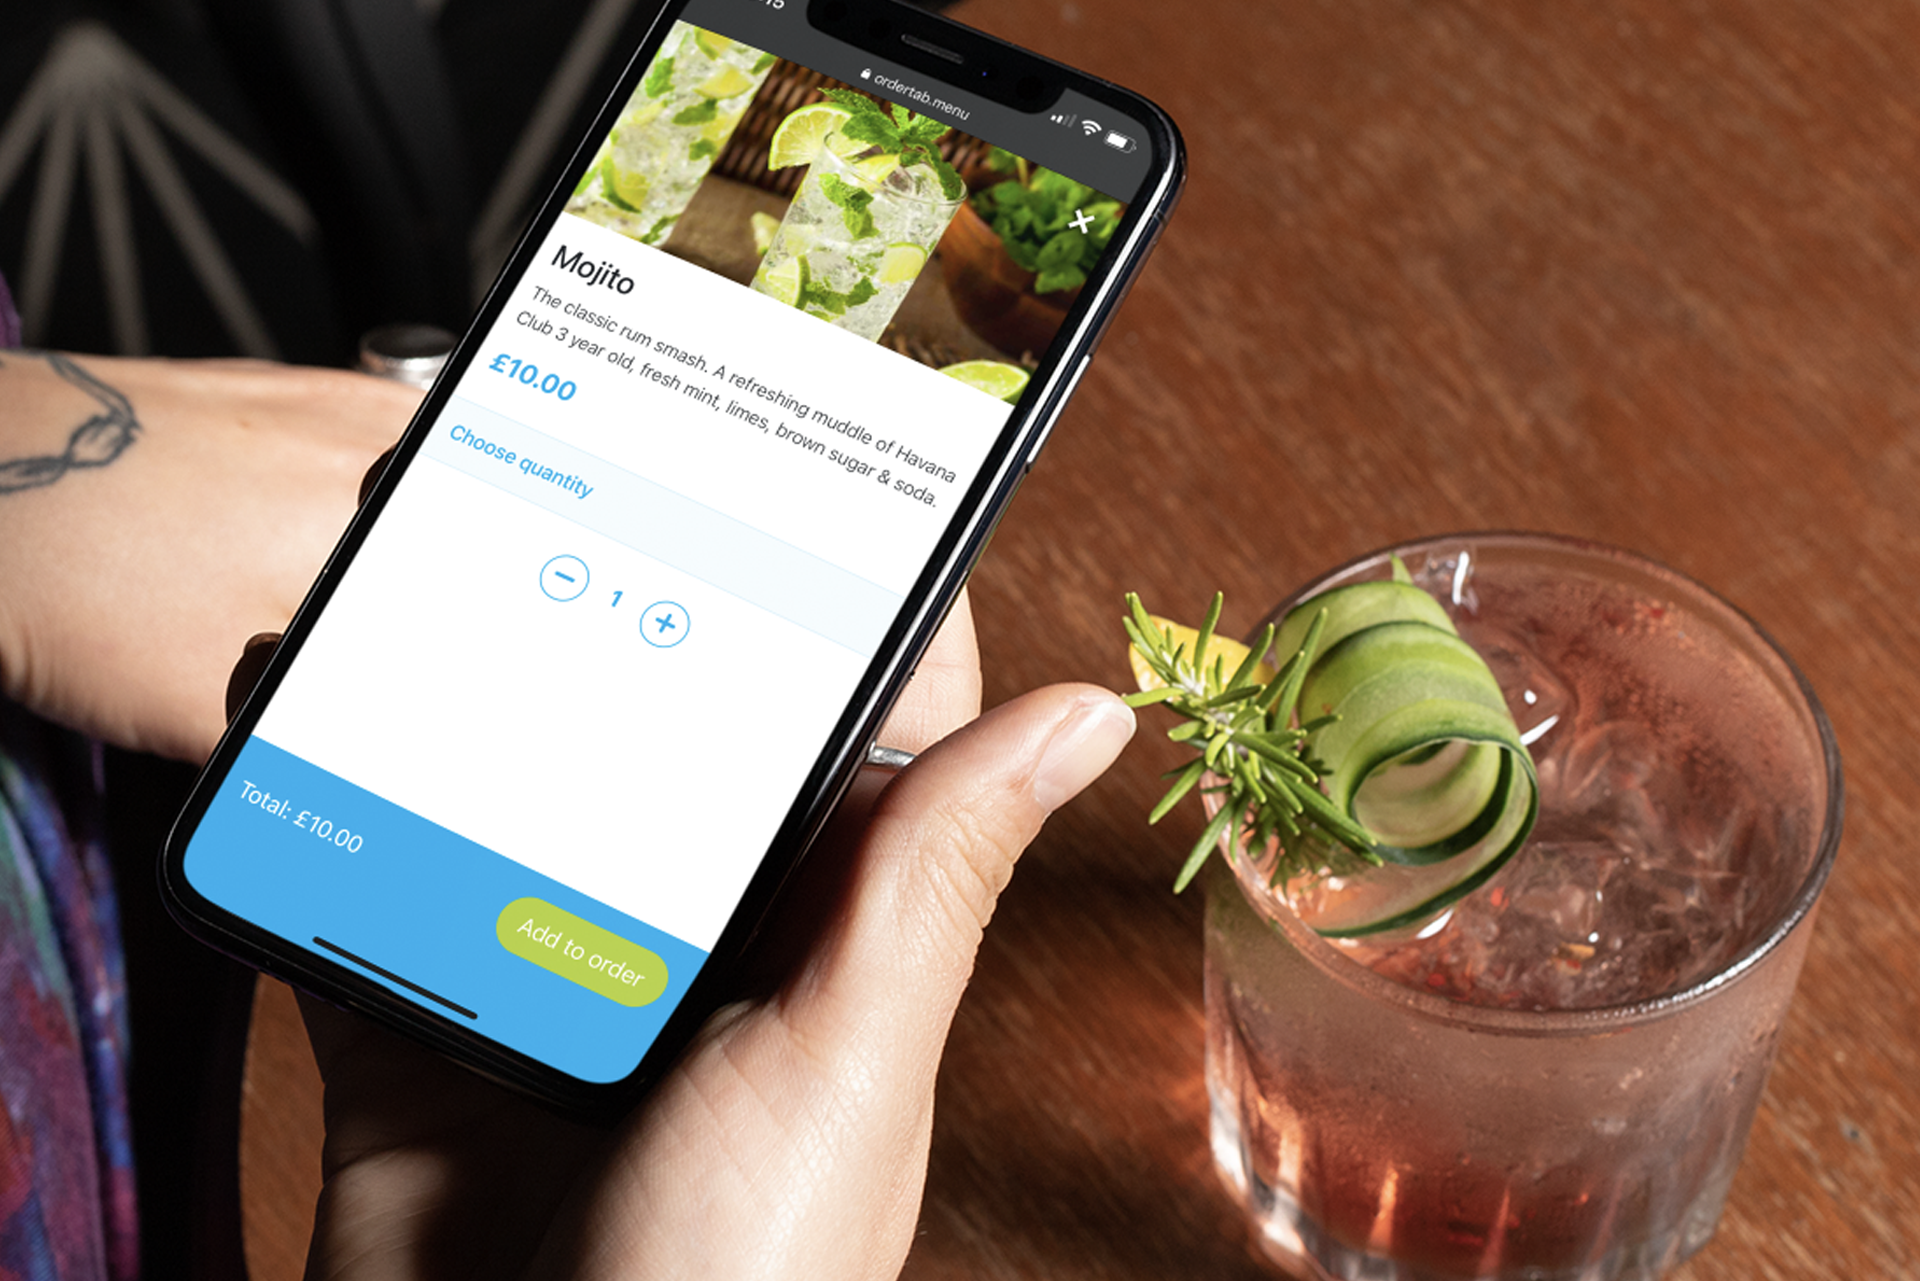 Mojito order on mobile ordering app